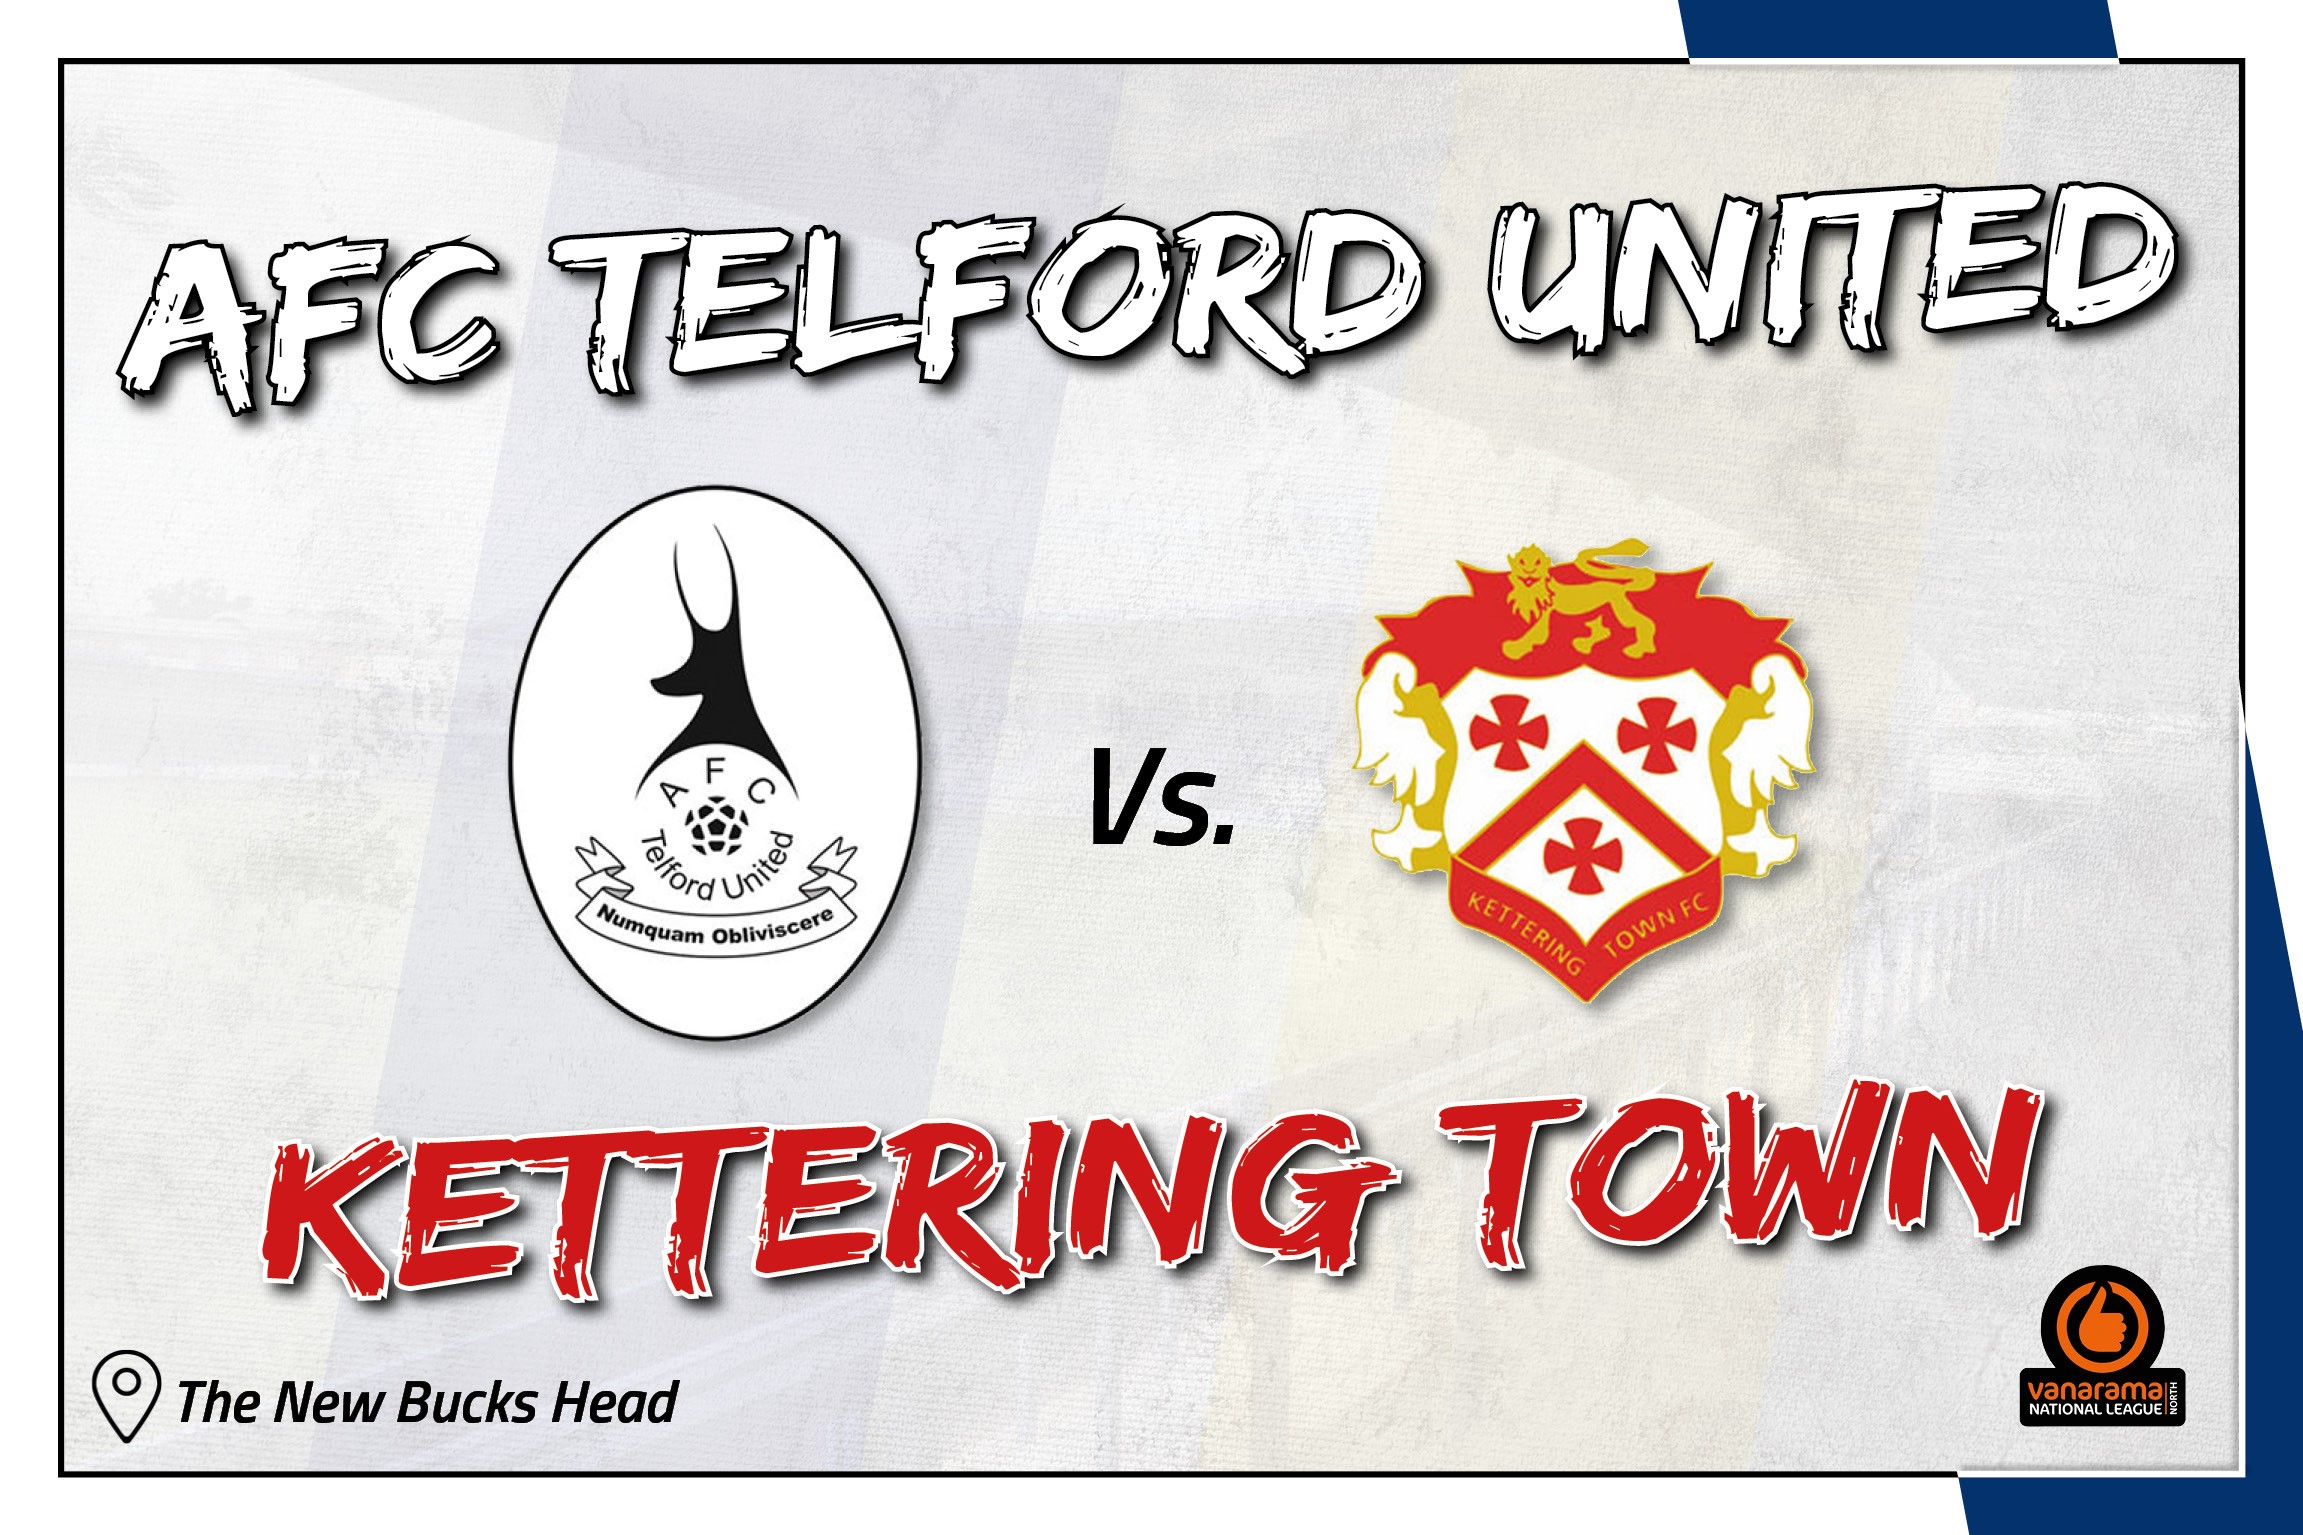 Match Guide: Kettering Town